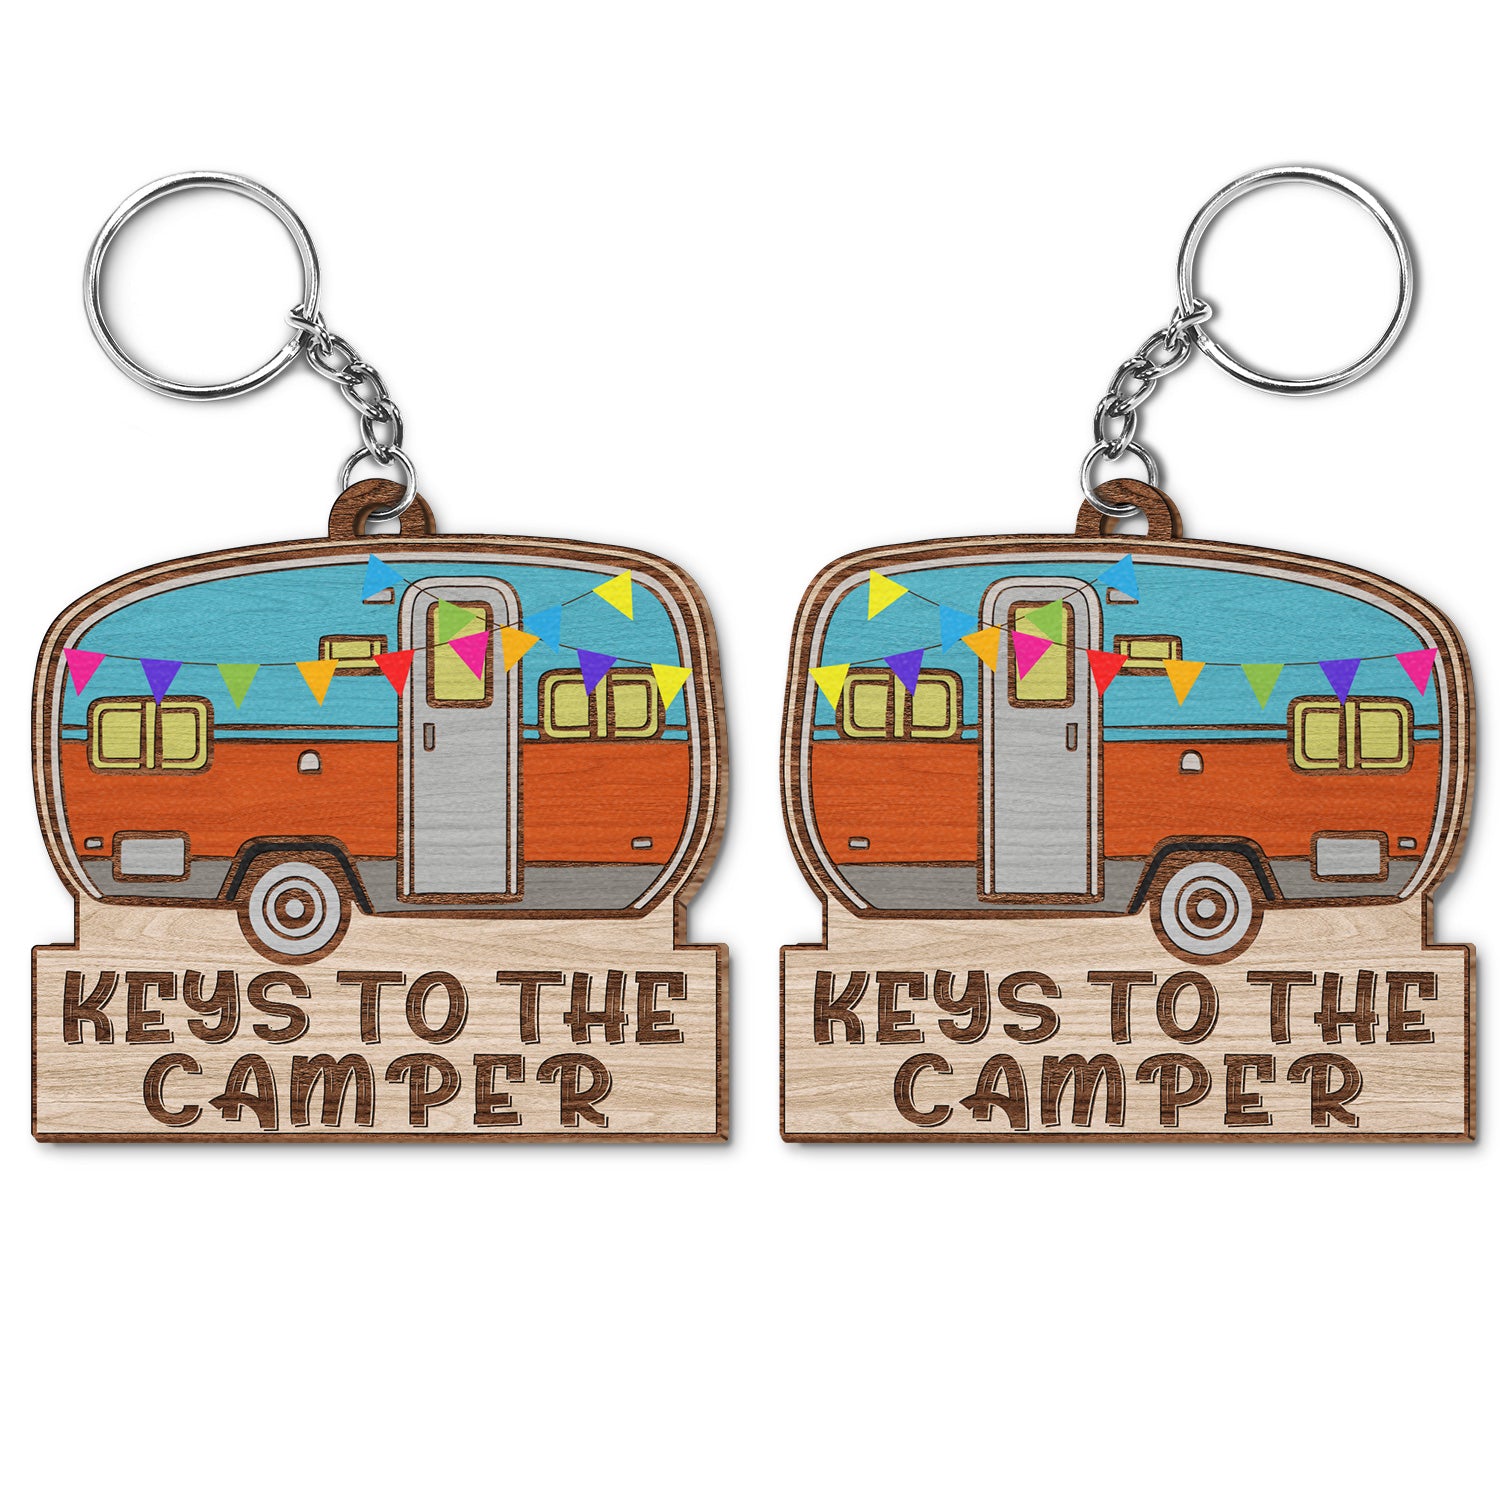 Keys To The Camper Vintage Trailer - Funny, Loving Gifts For Couples, Husband, Wife, Camping Lovers - Personalized Wooden Keychain